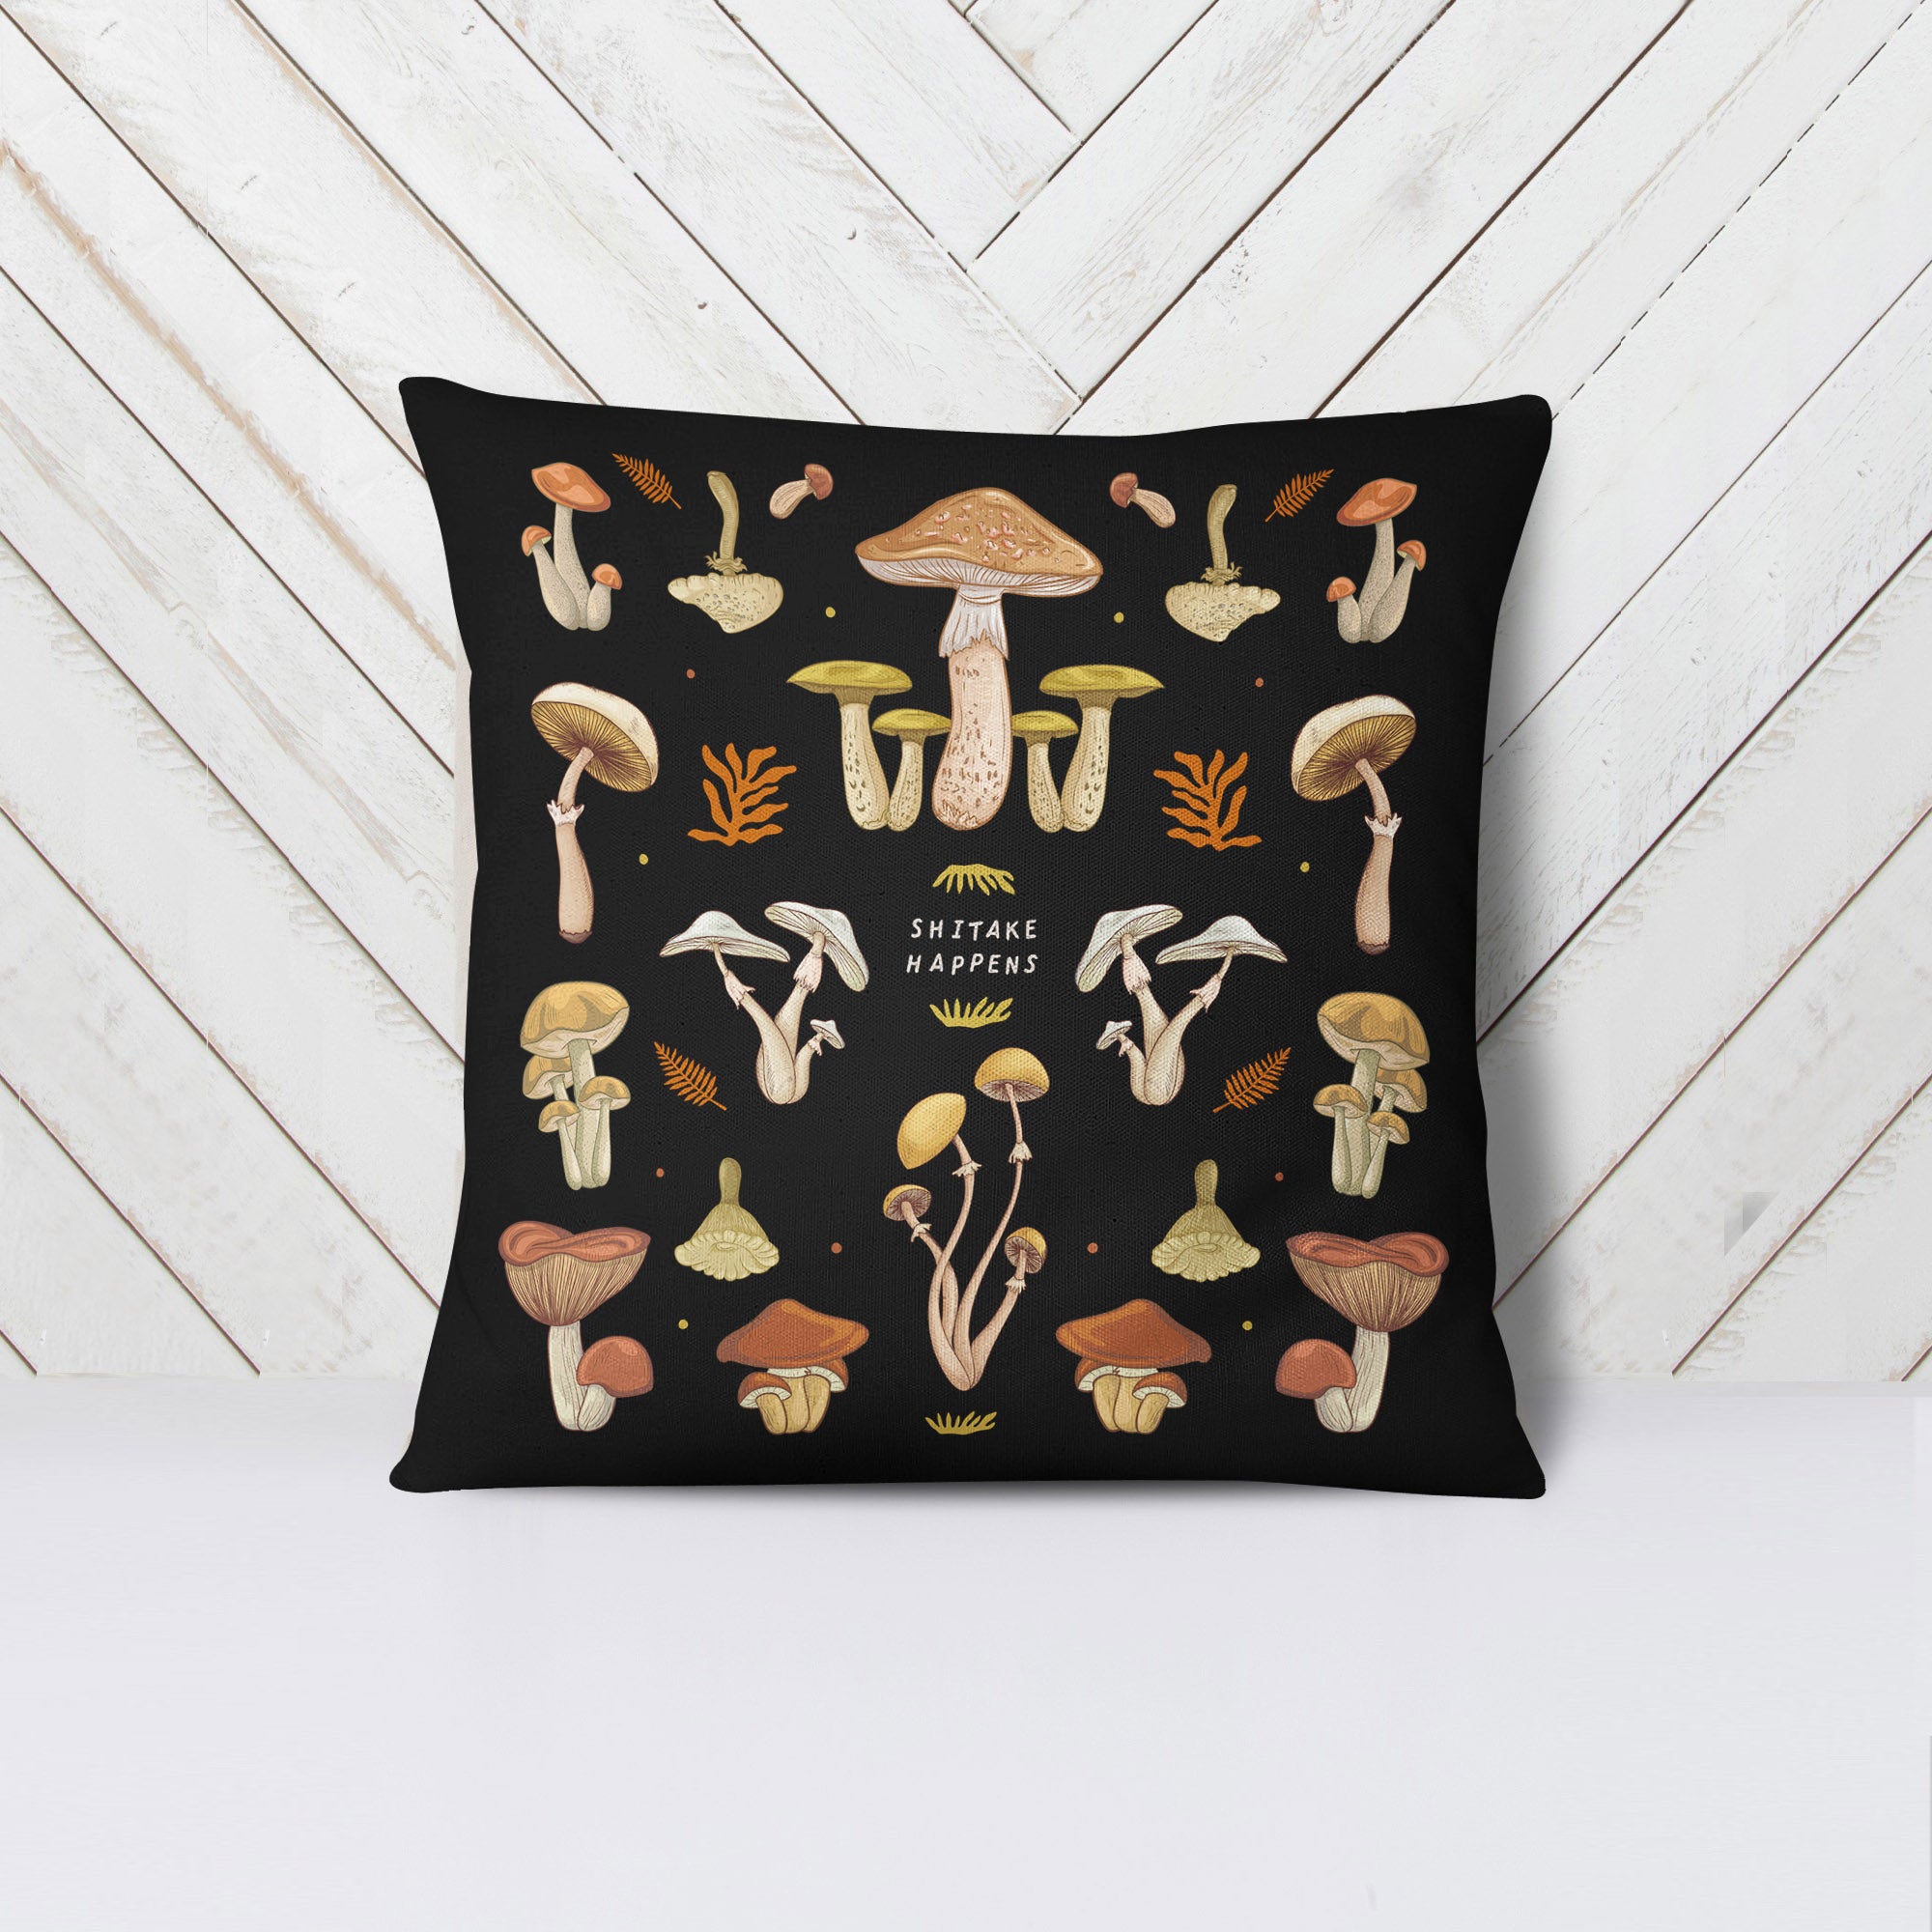 Mushroom Fungi Shitake Happens Pillow - Pillow - Personalized Gifts for Couples, Custom Birthday Gifts, Custom Anniversary Gifts | Relatable Basic